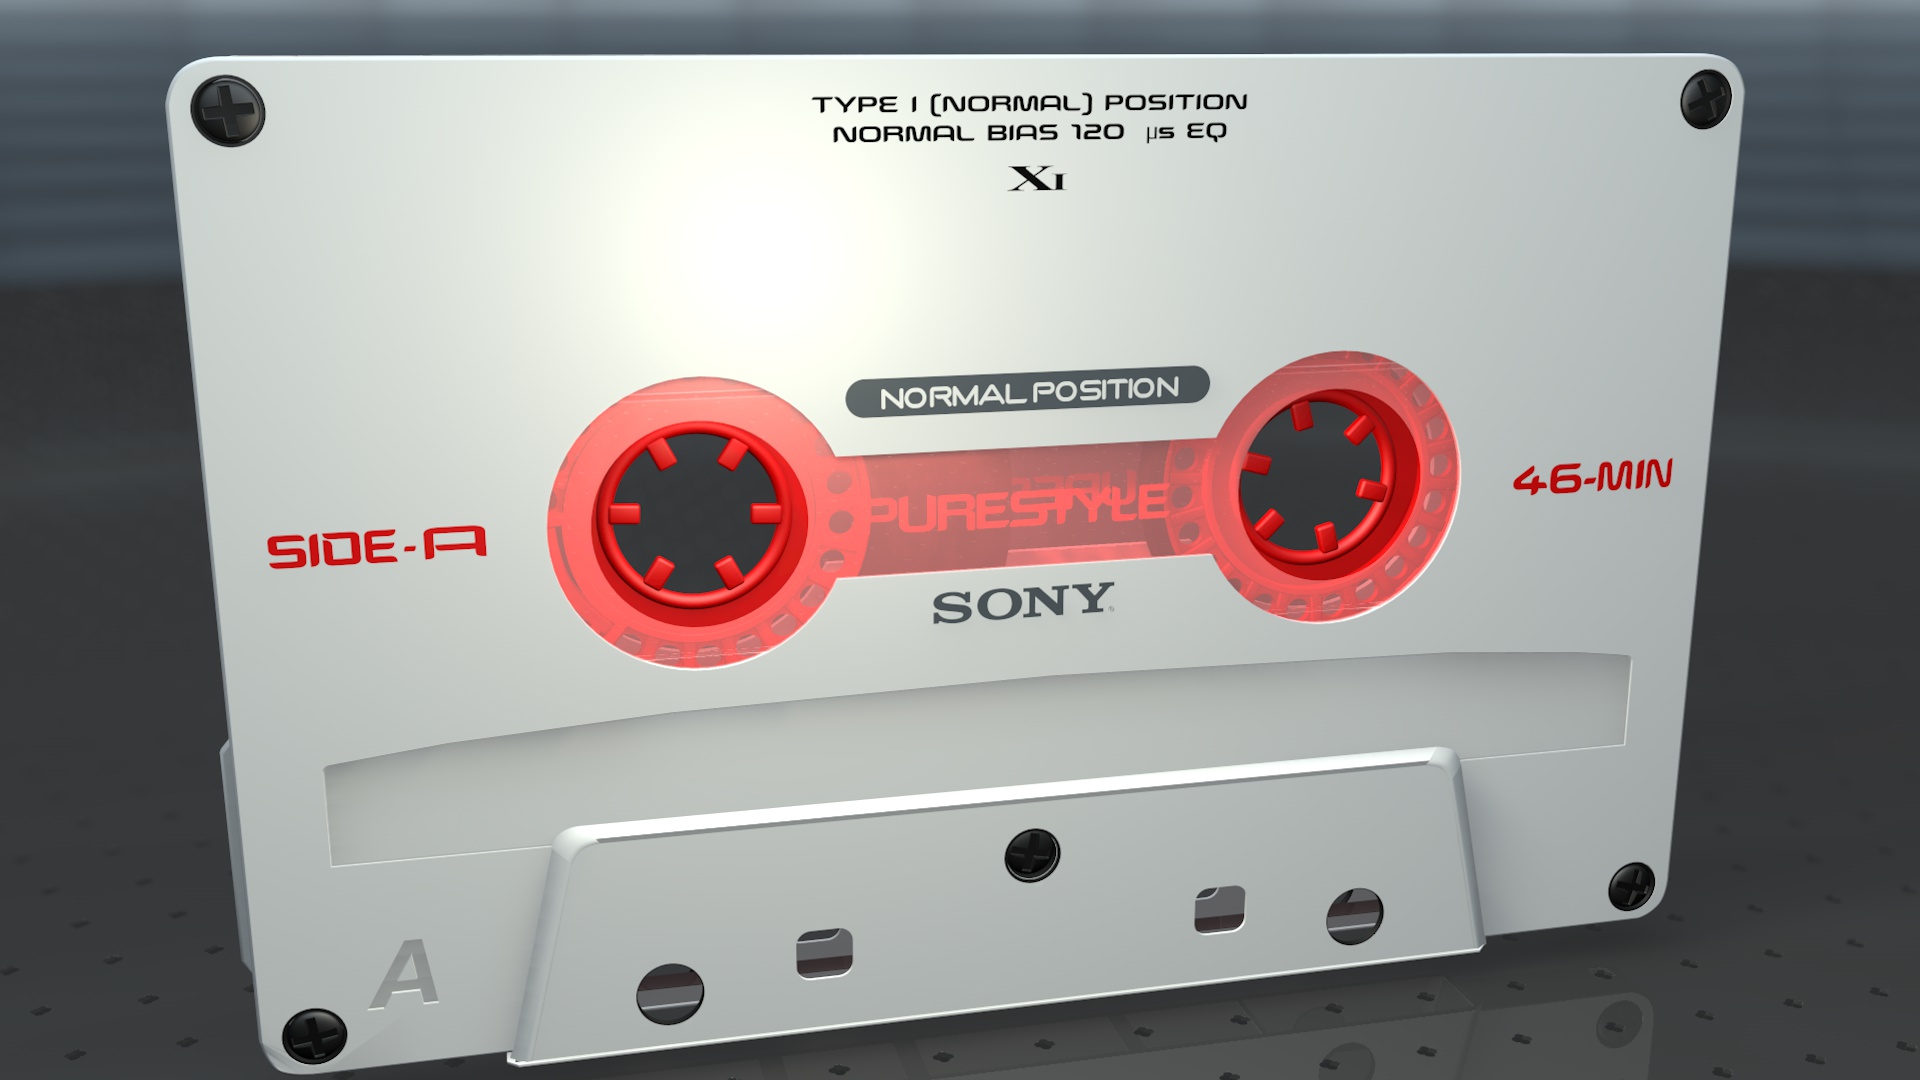 Cassette Sony XI Normal Position(1997) collection #7 by HumanGraphics